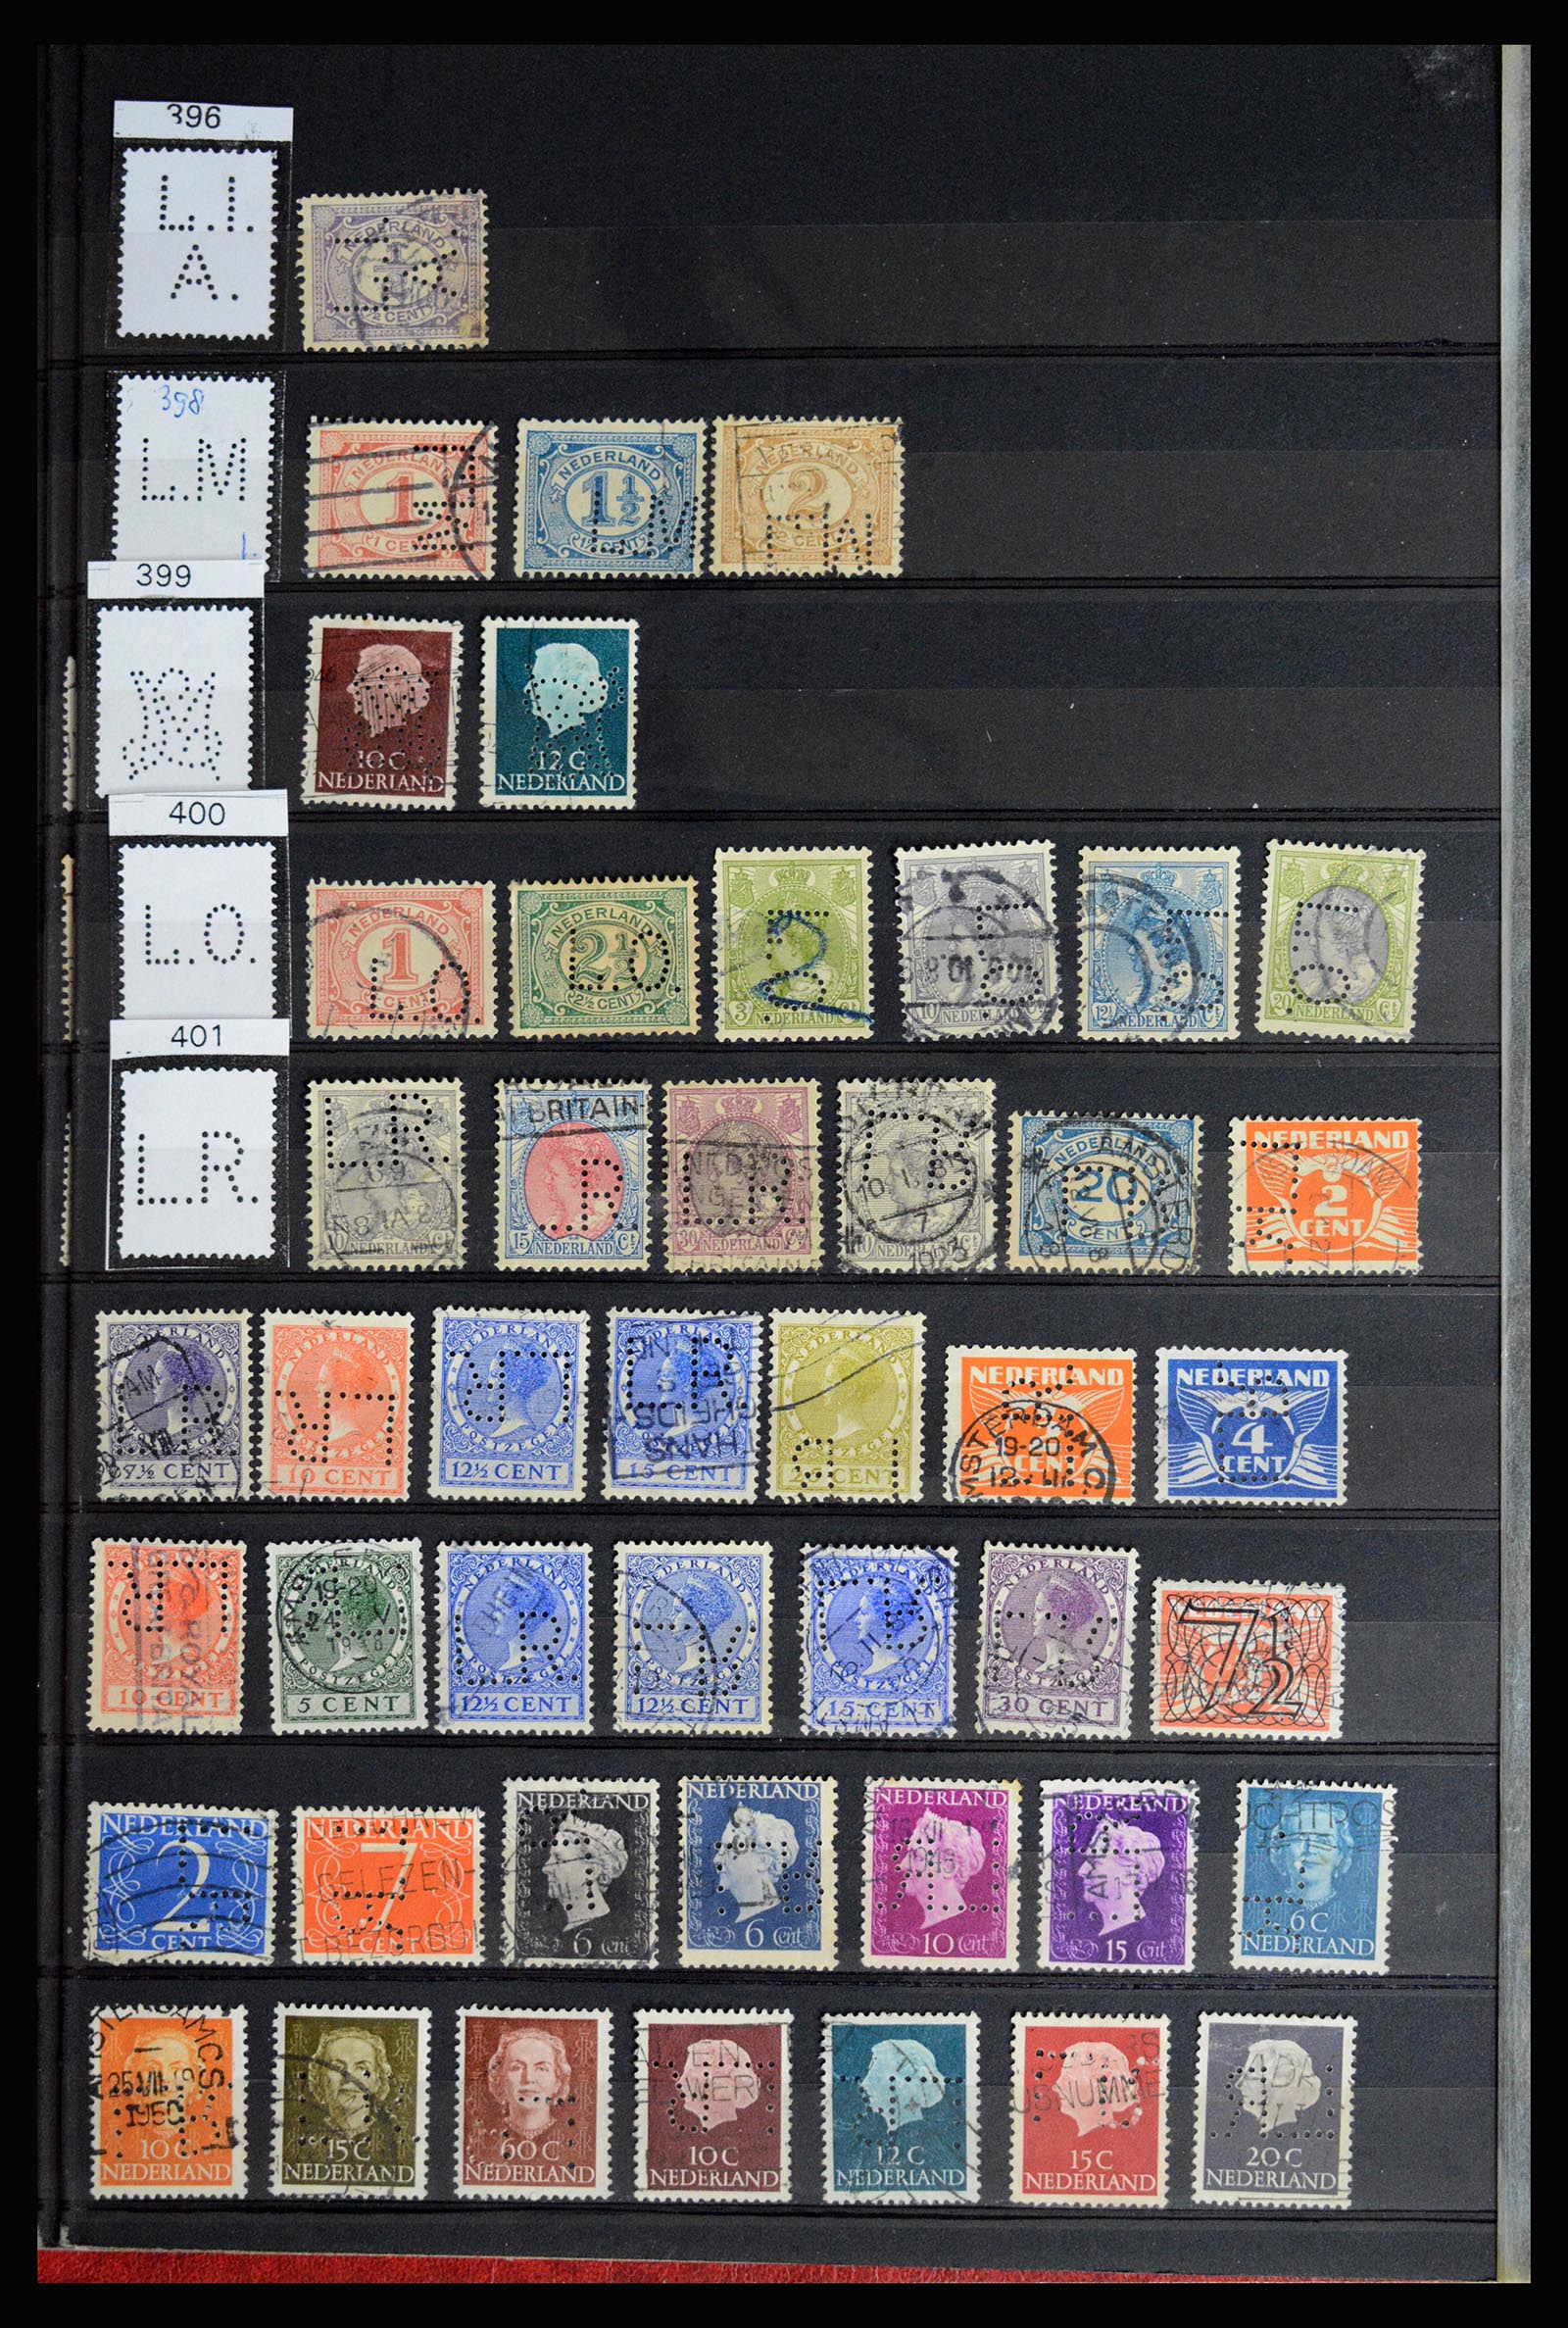 36849 060 - Stamp collection 36849 Netherlands perfins 1891-1960.